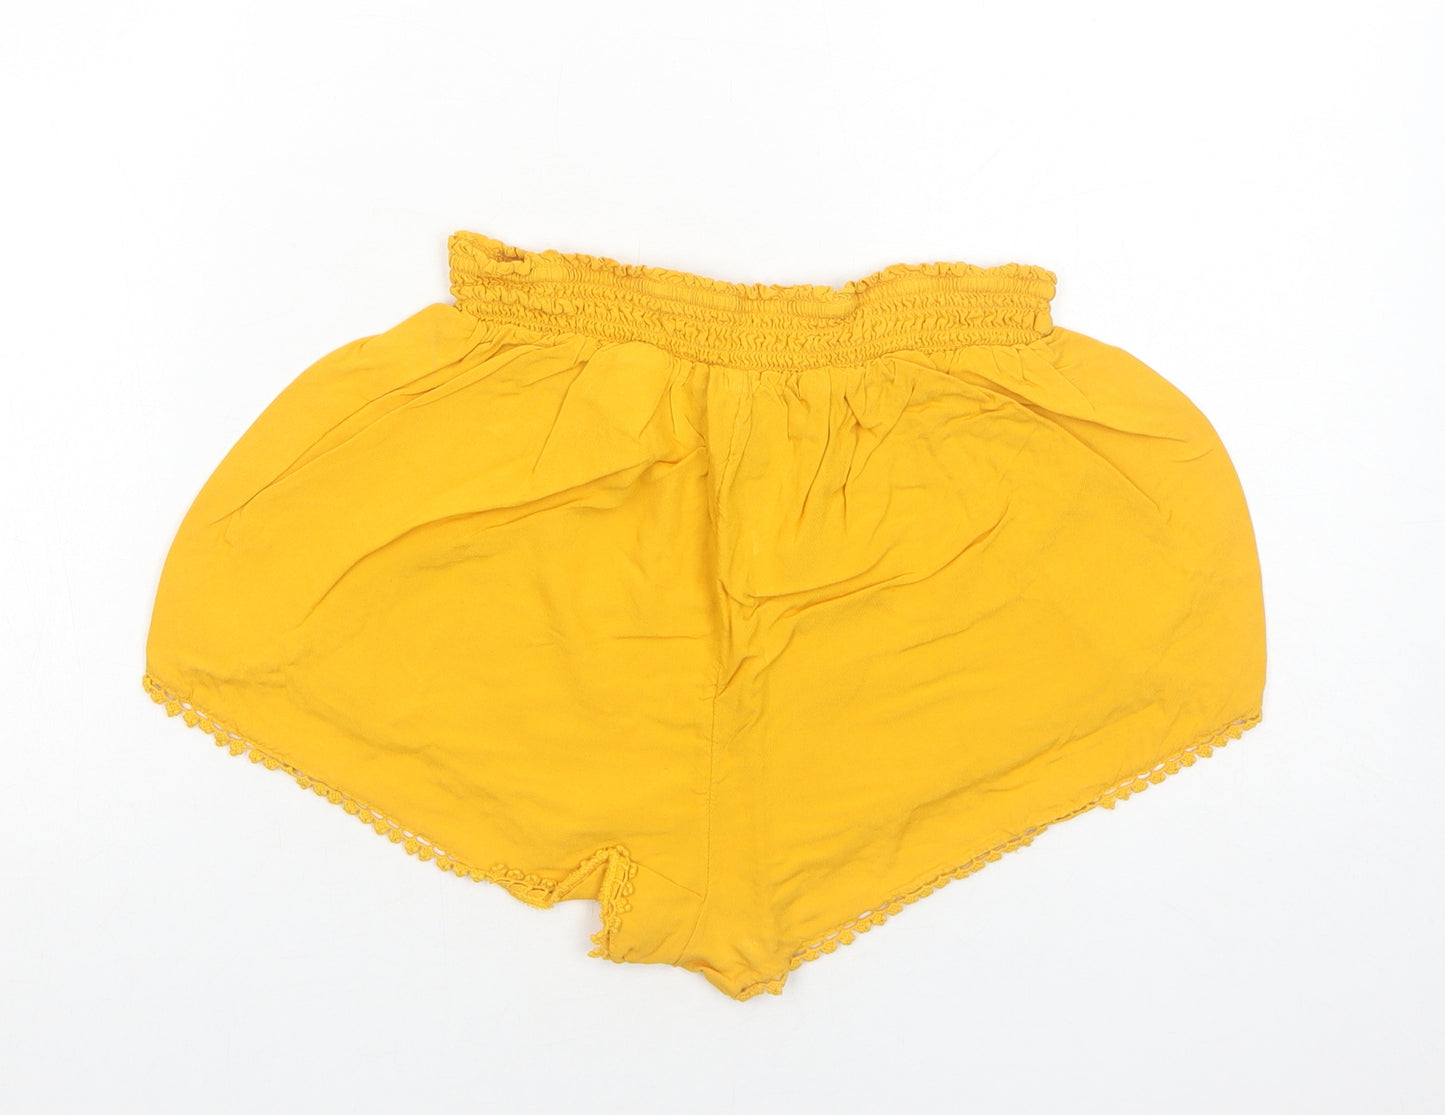 Primark Womens Yellow Viscose Culotte Shorts Size S Regular Pull On